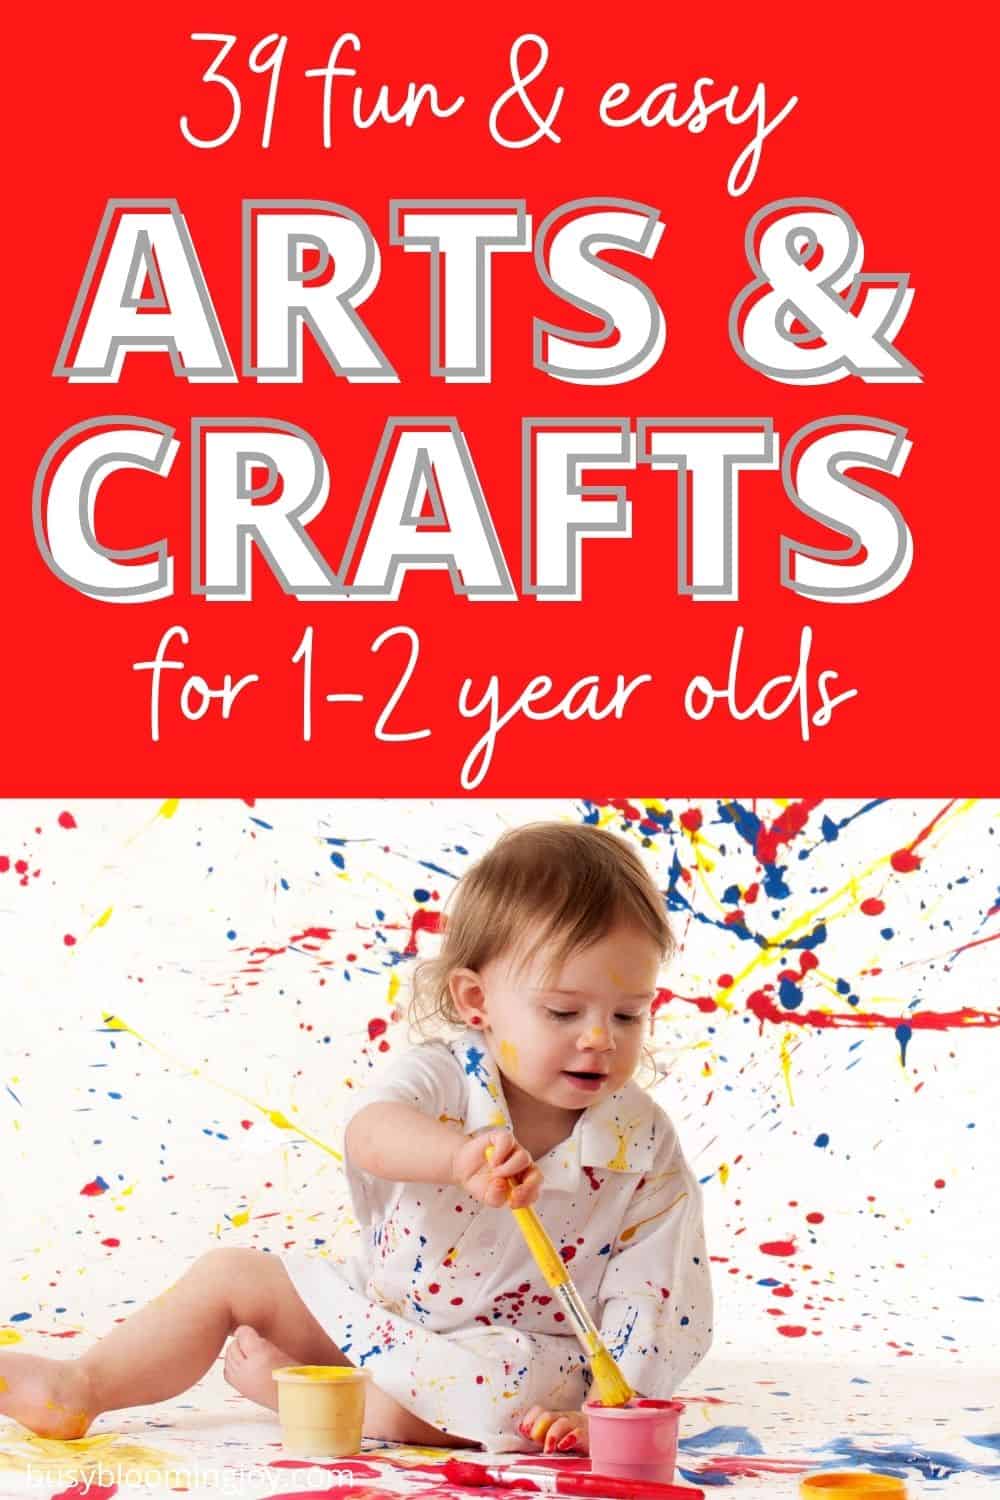 Read more about the article 39 Fun & easy arts projects & crafts for 1 – 2 year olds